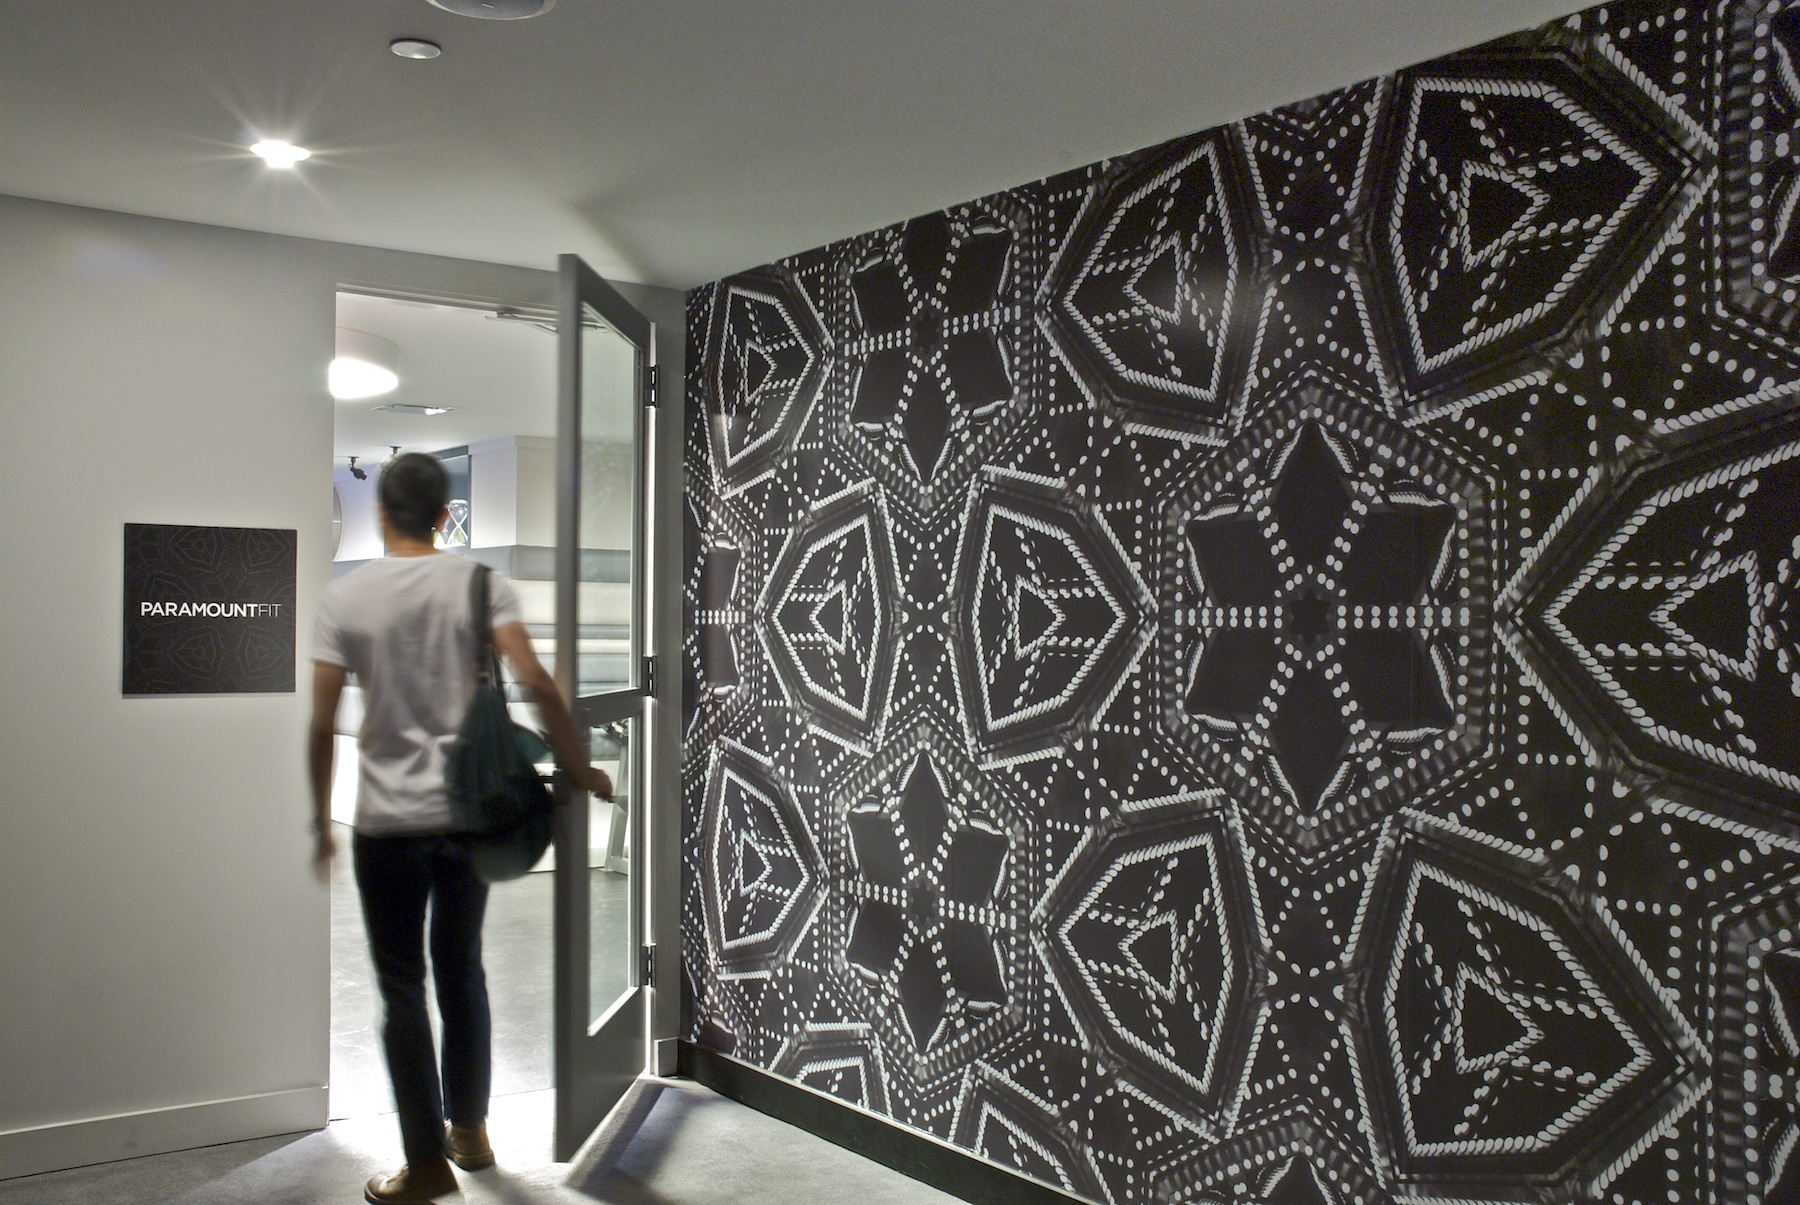 Wall graphics for Paramount Hotel